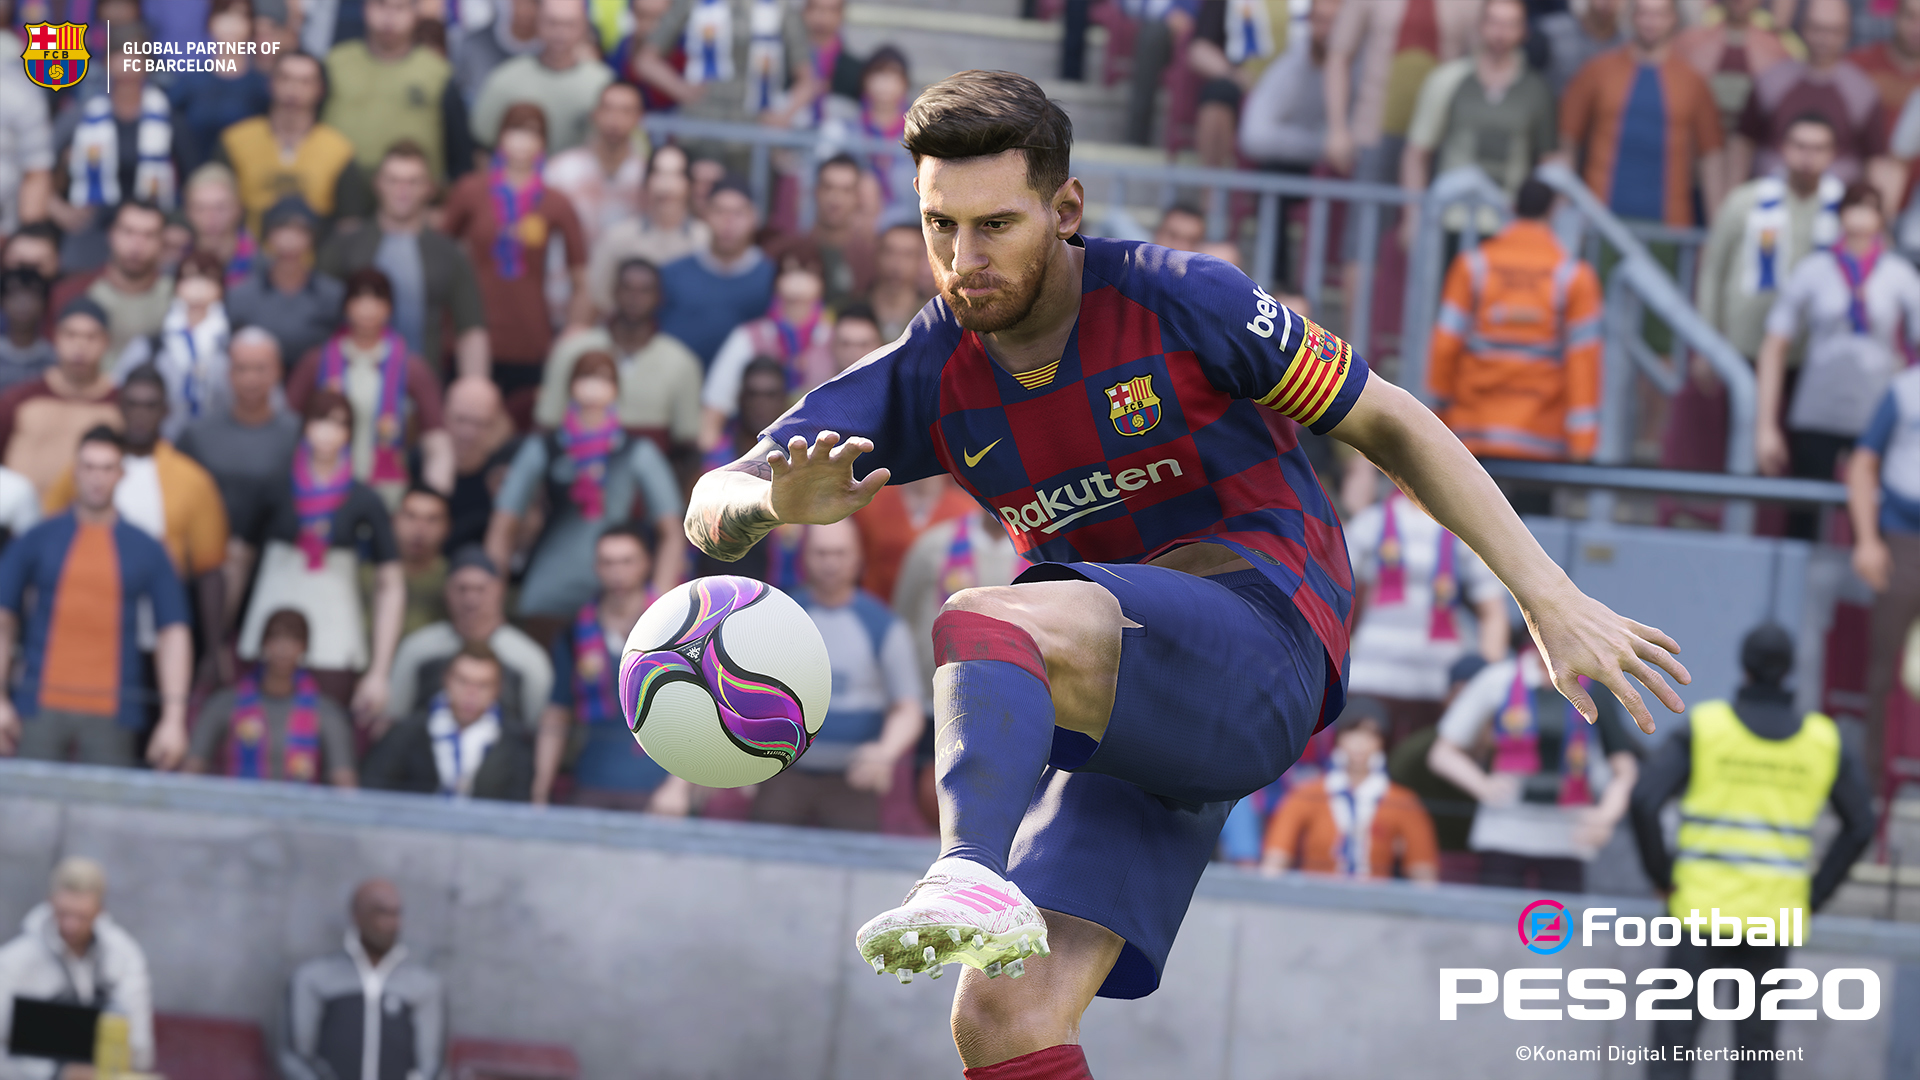 EFootball PES 2020 Hands On Proves Mixed News For Die Hard Fans